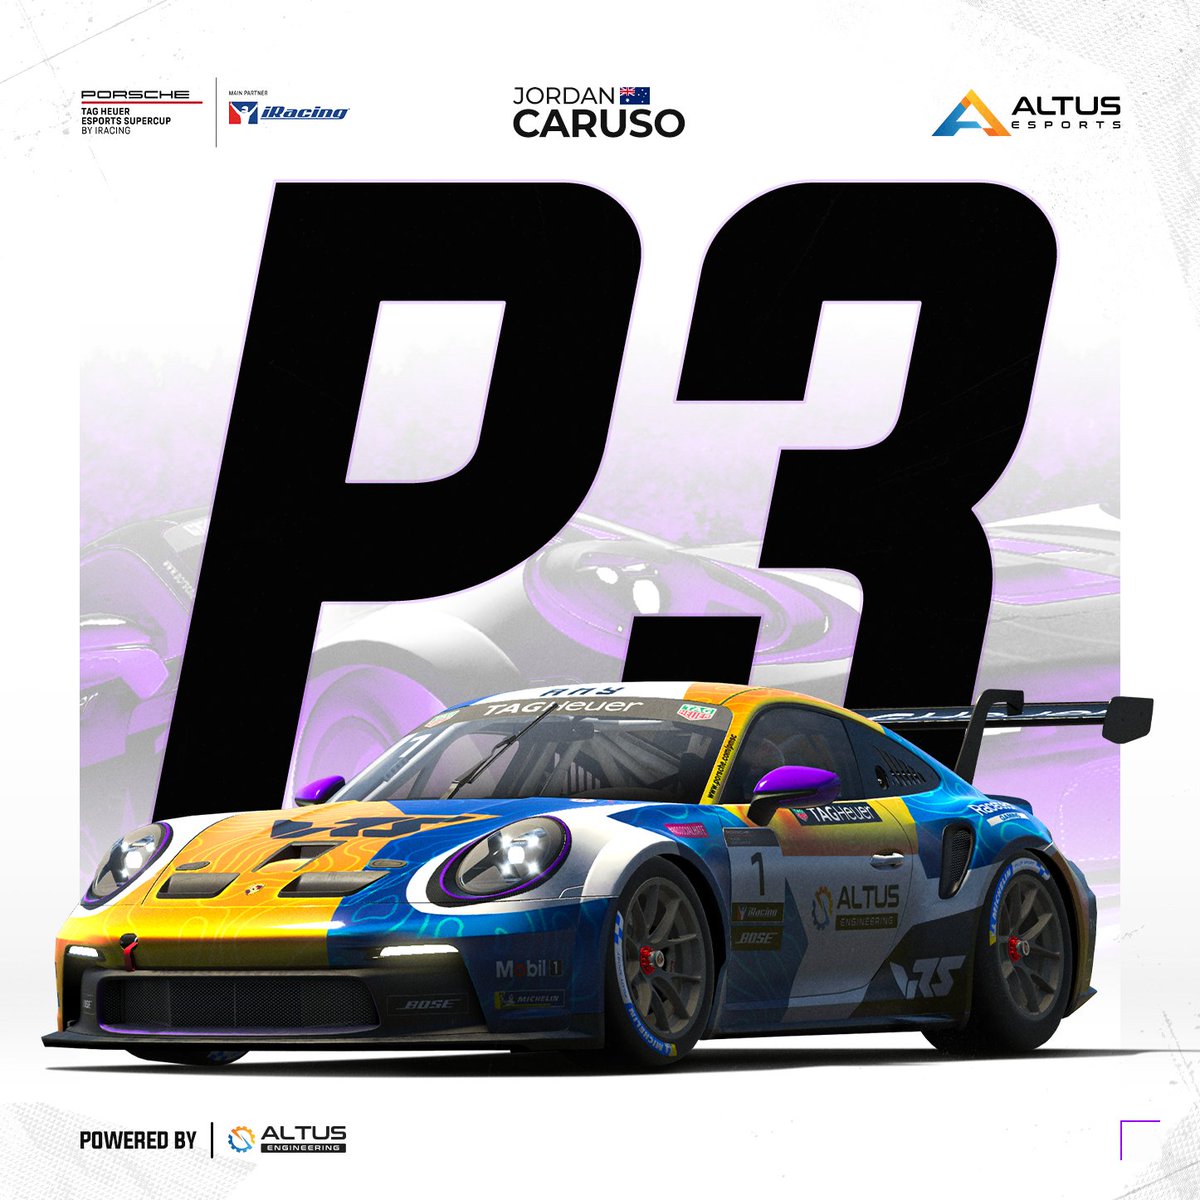 After post-race penalties were applied, @JCaruso012 moves up to the Championship Podium in the Porsche TAG Heuer Esports Supercup! 😍 #WeAreAltus @Altus_Engineer @realVRS @iRacing @PorscheRaces